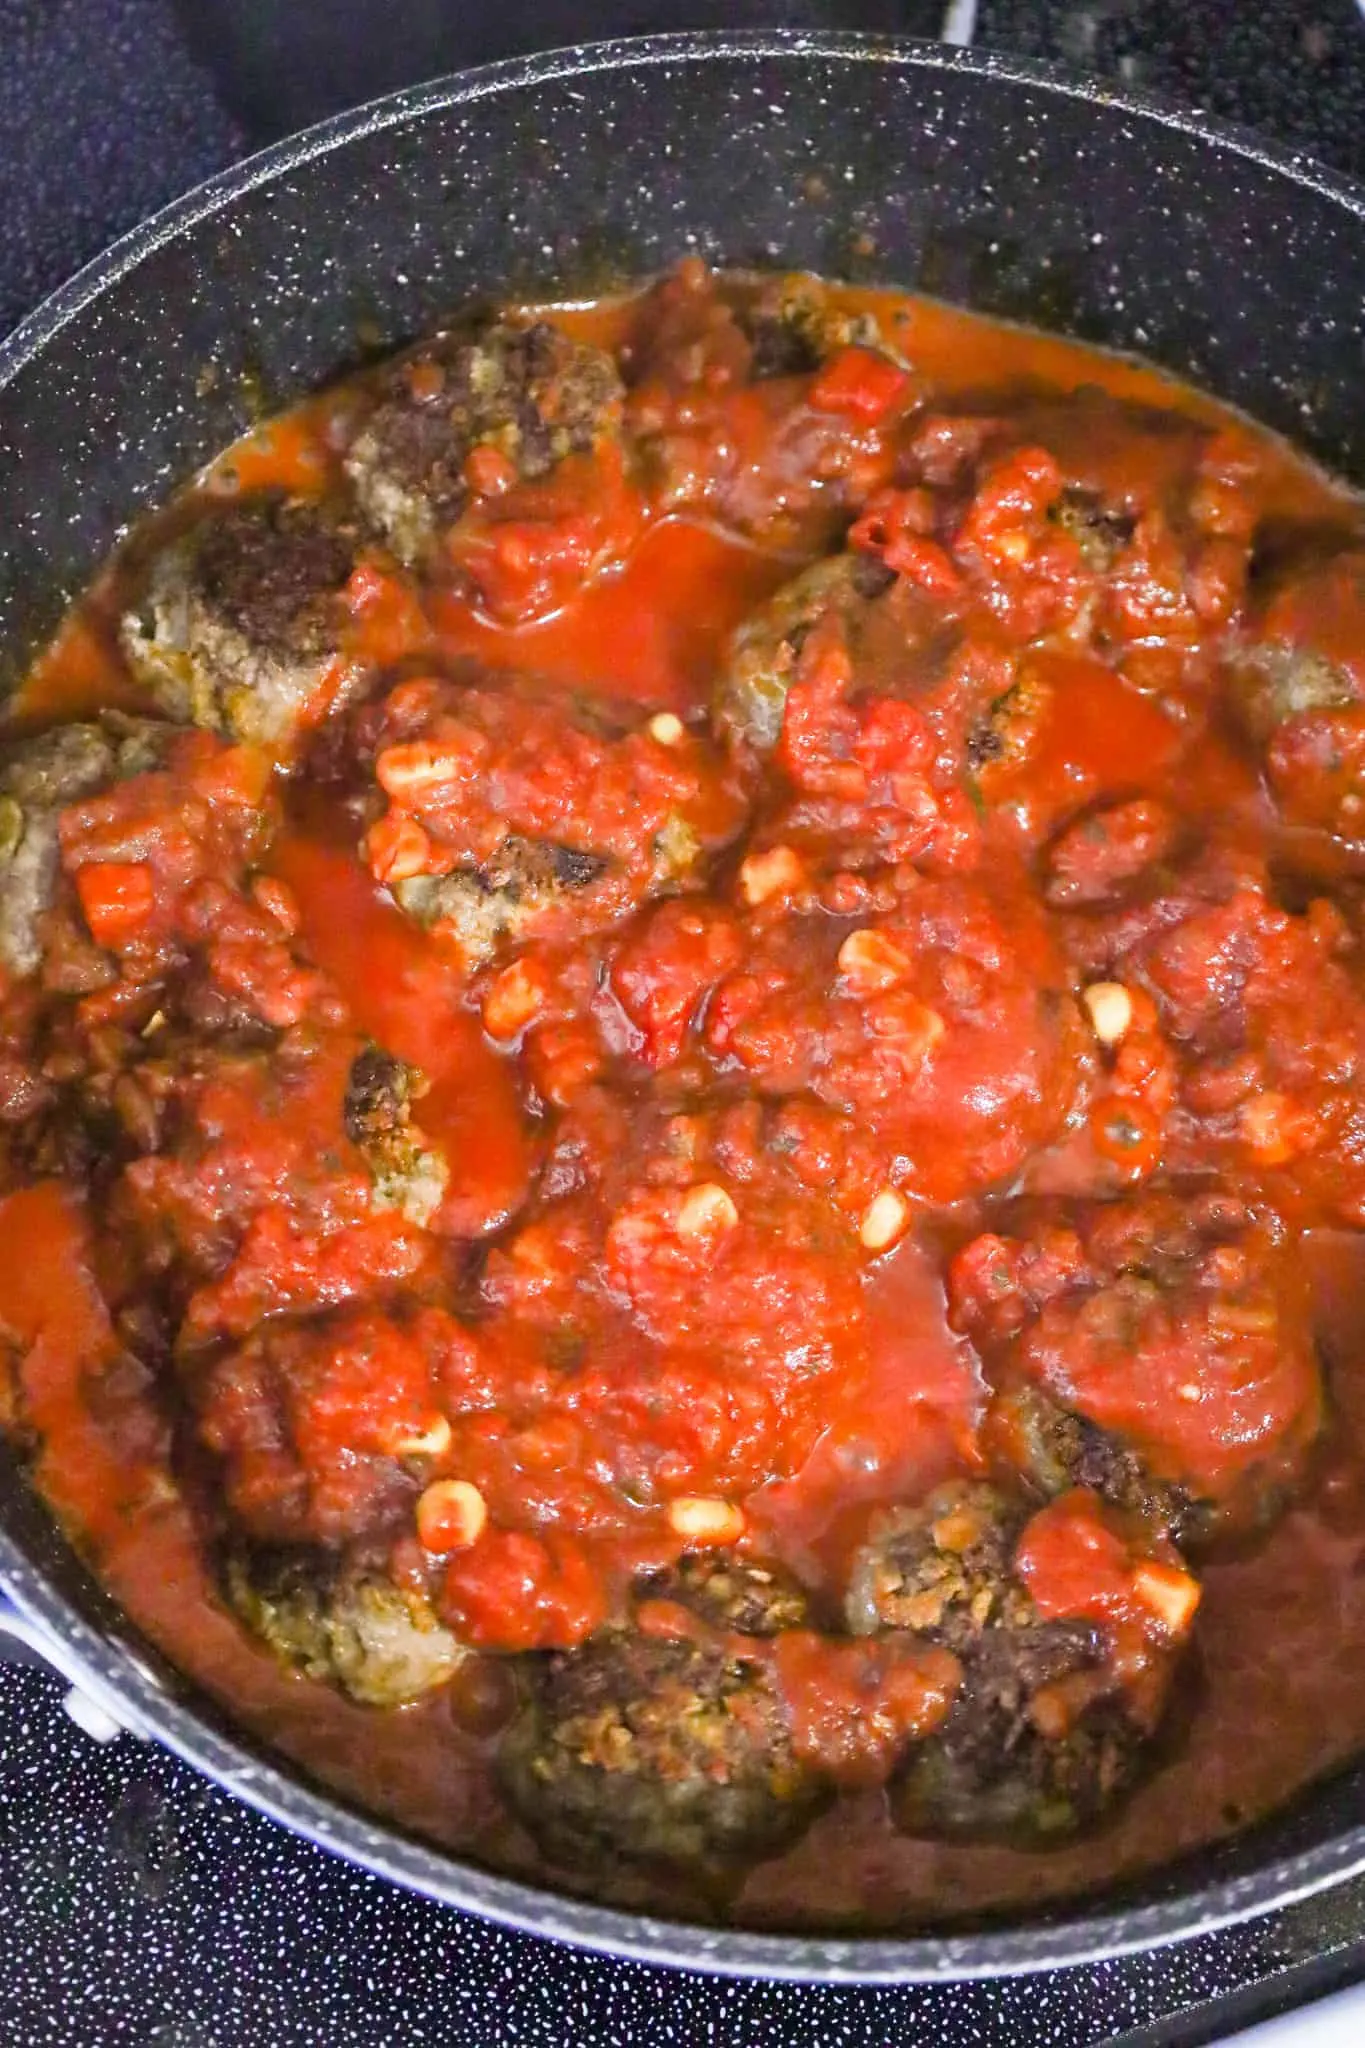 salsa and tomato sauce on top of meatballs cooking in a skillet